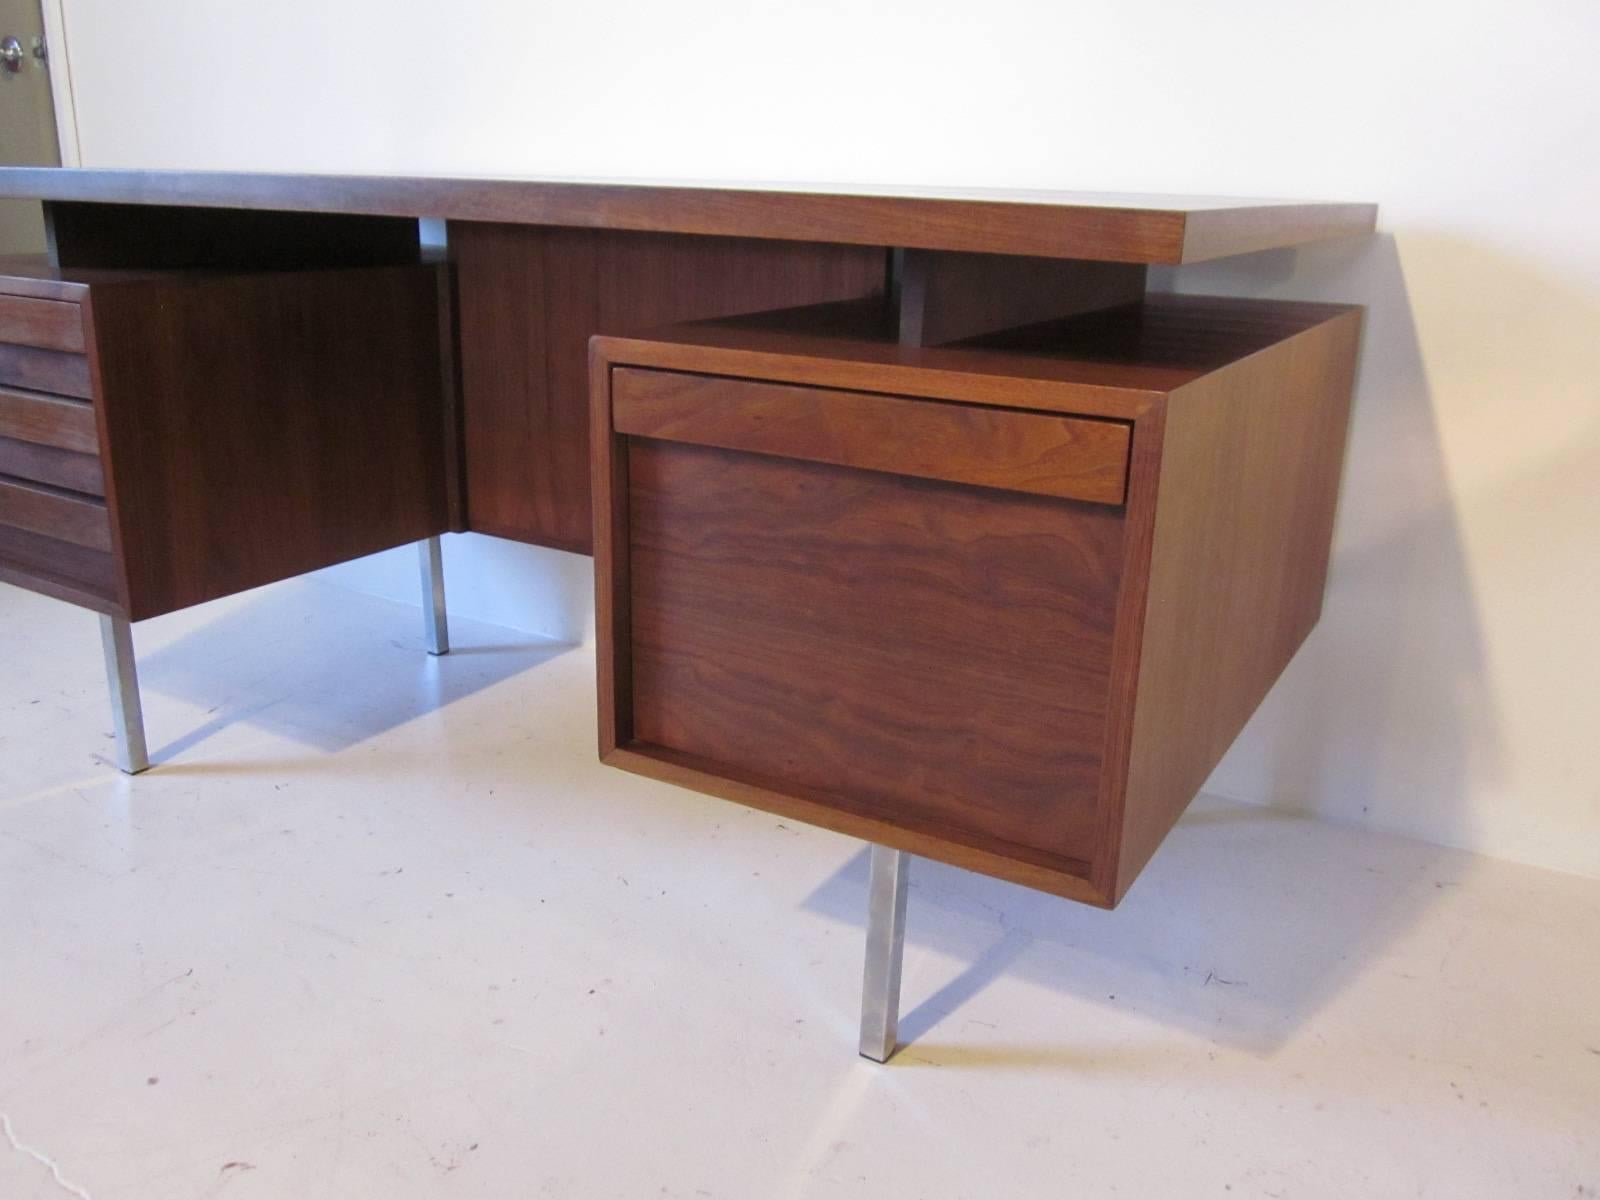 A rich dark walnut floating top desk with two banks of drawers, three to one side and a single file drawer to the other all sitting on square chromed metal legs. A bookcase is built into the other side with plenty of room making this desk great for